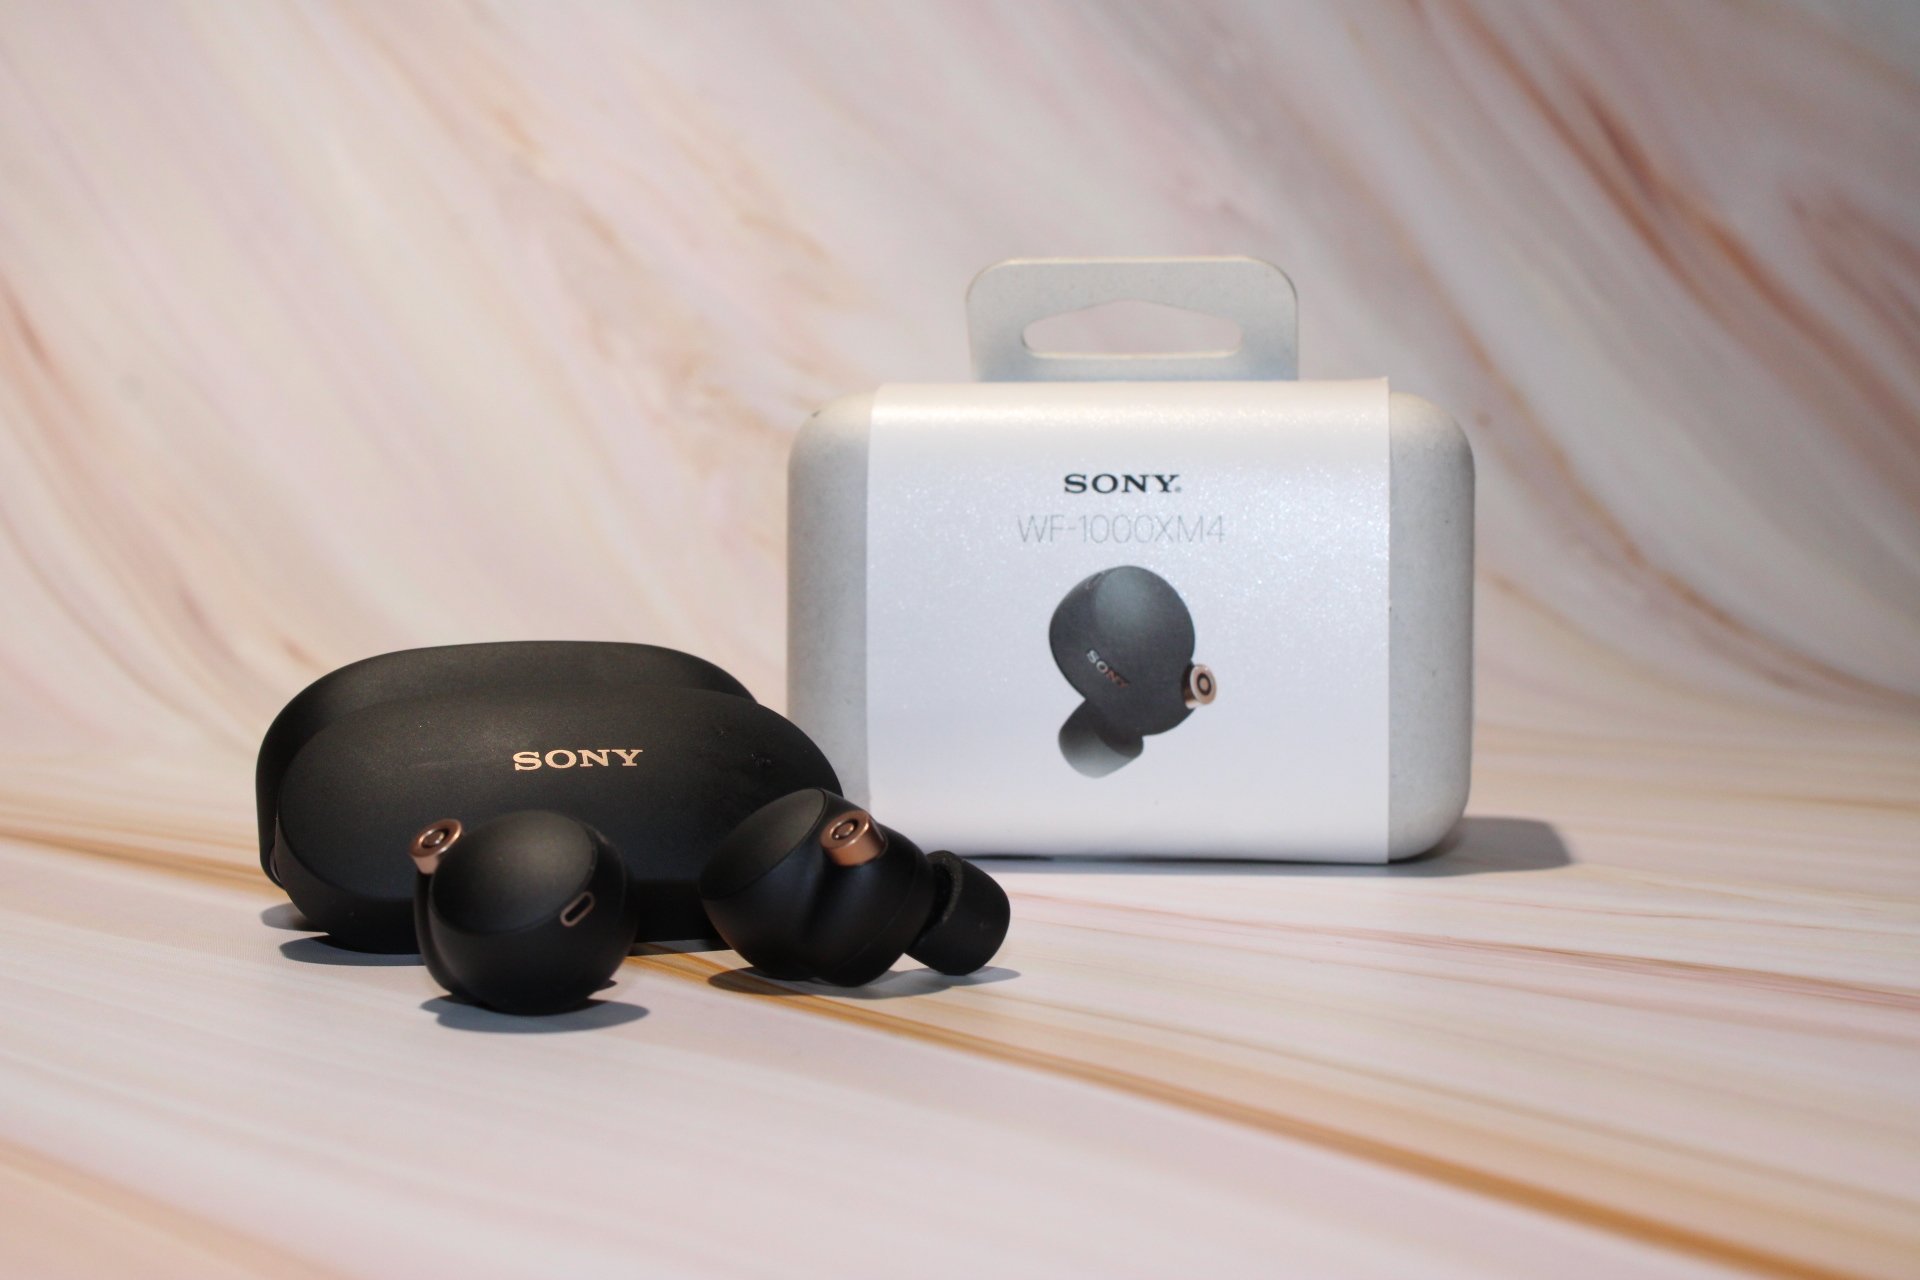 Sony WF-1000XM4: 10 things to know before buying